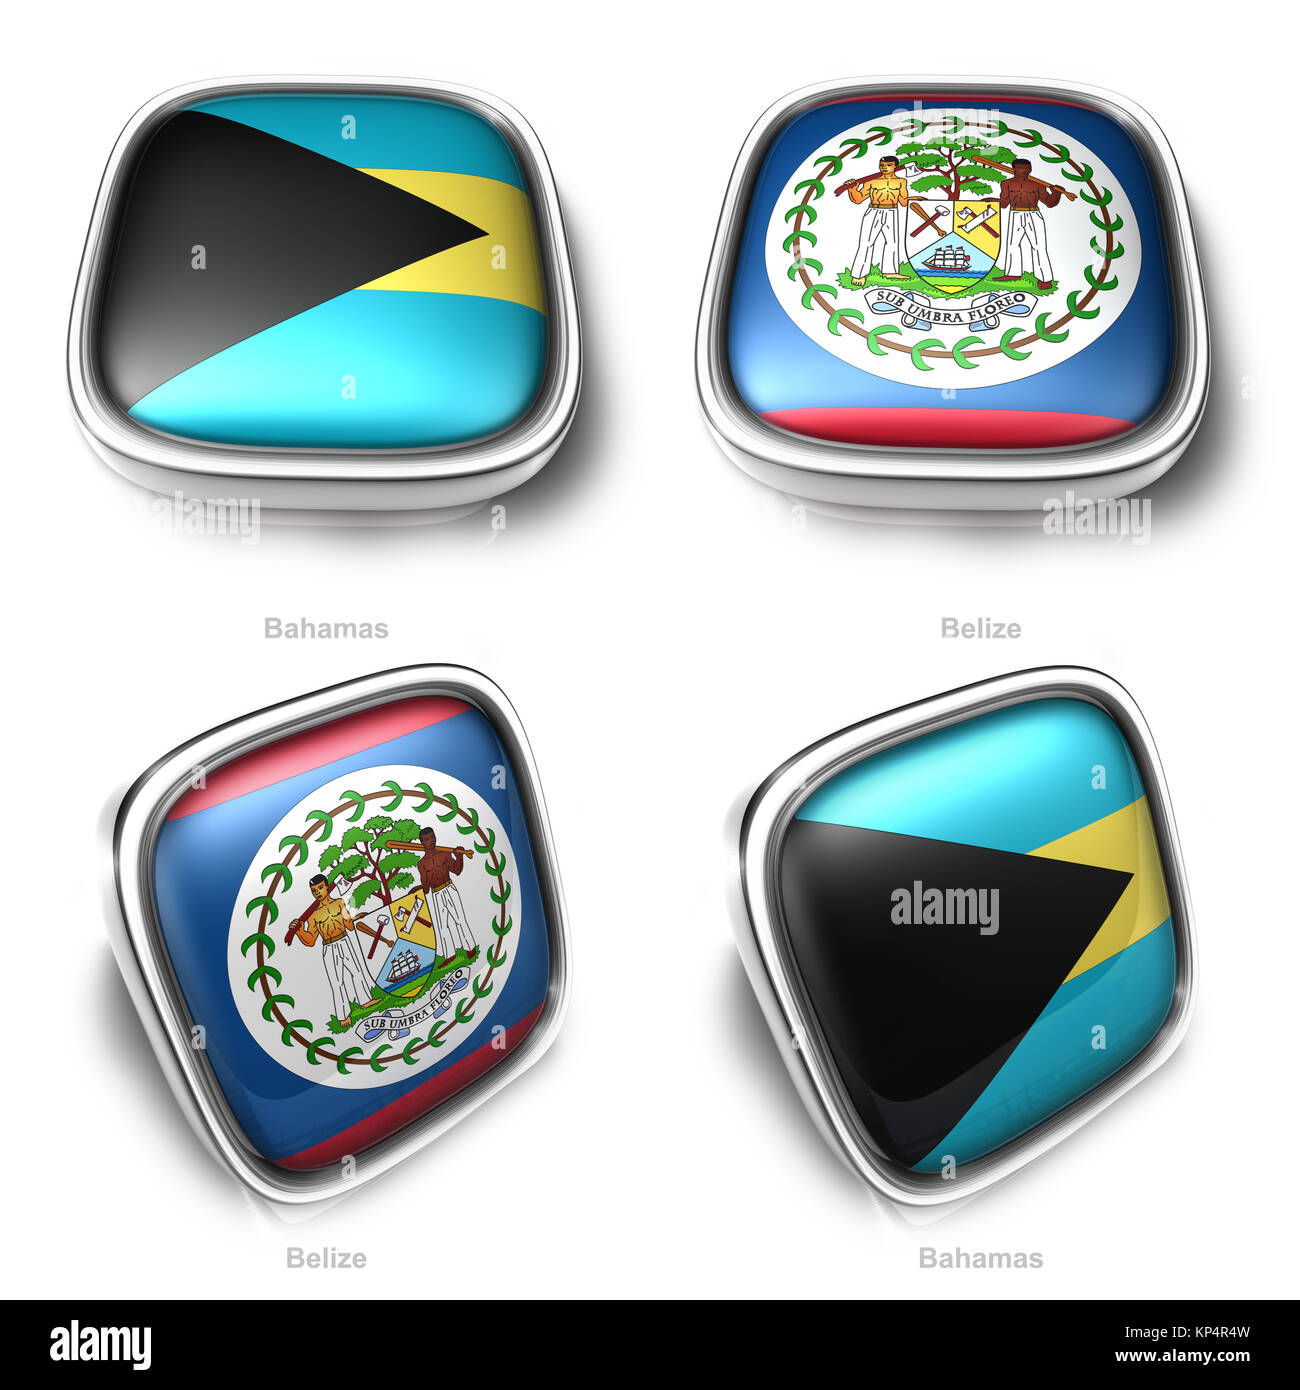 3d Bahamas and Belize flag button Stock Photo